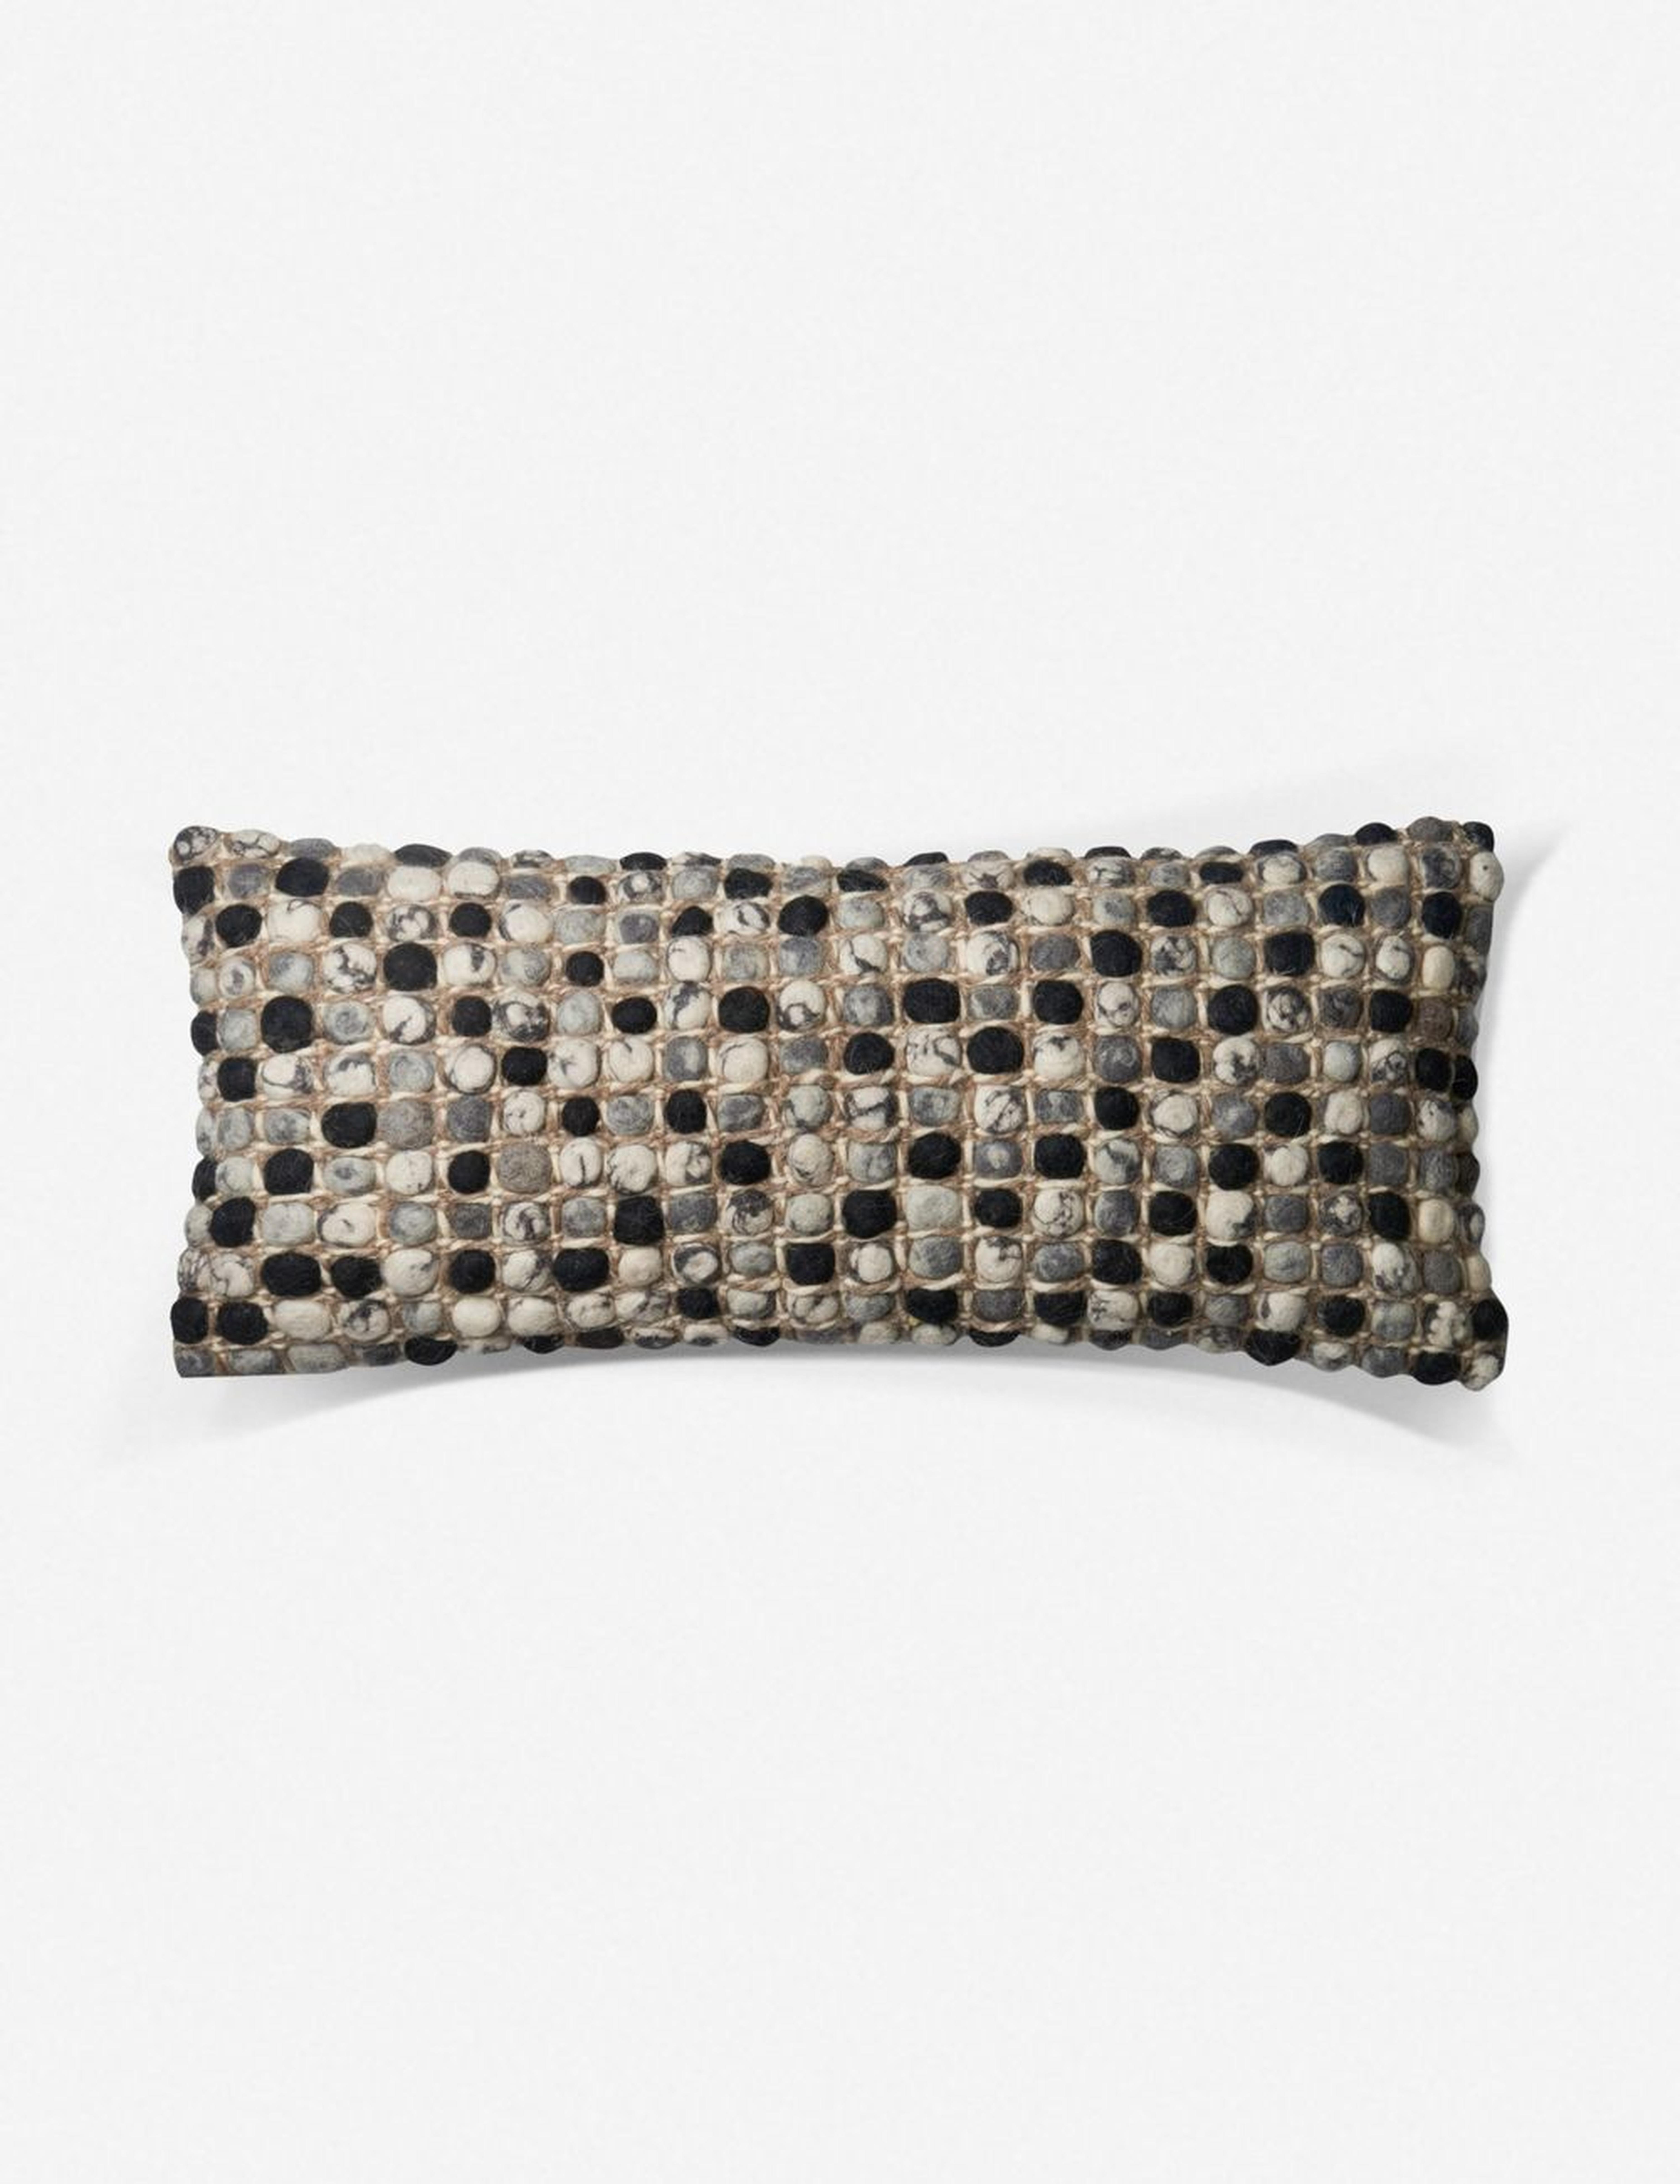 Montre Lumbar Pillow, Grey and Multi, ED Ellen DeGeneres Crafted by Loloi - Lulu and Georgia